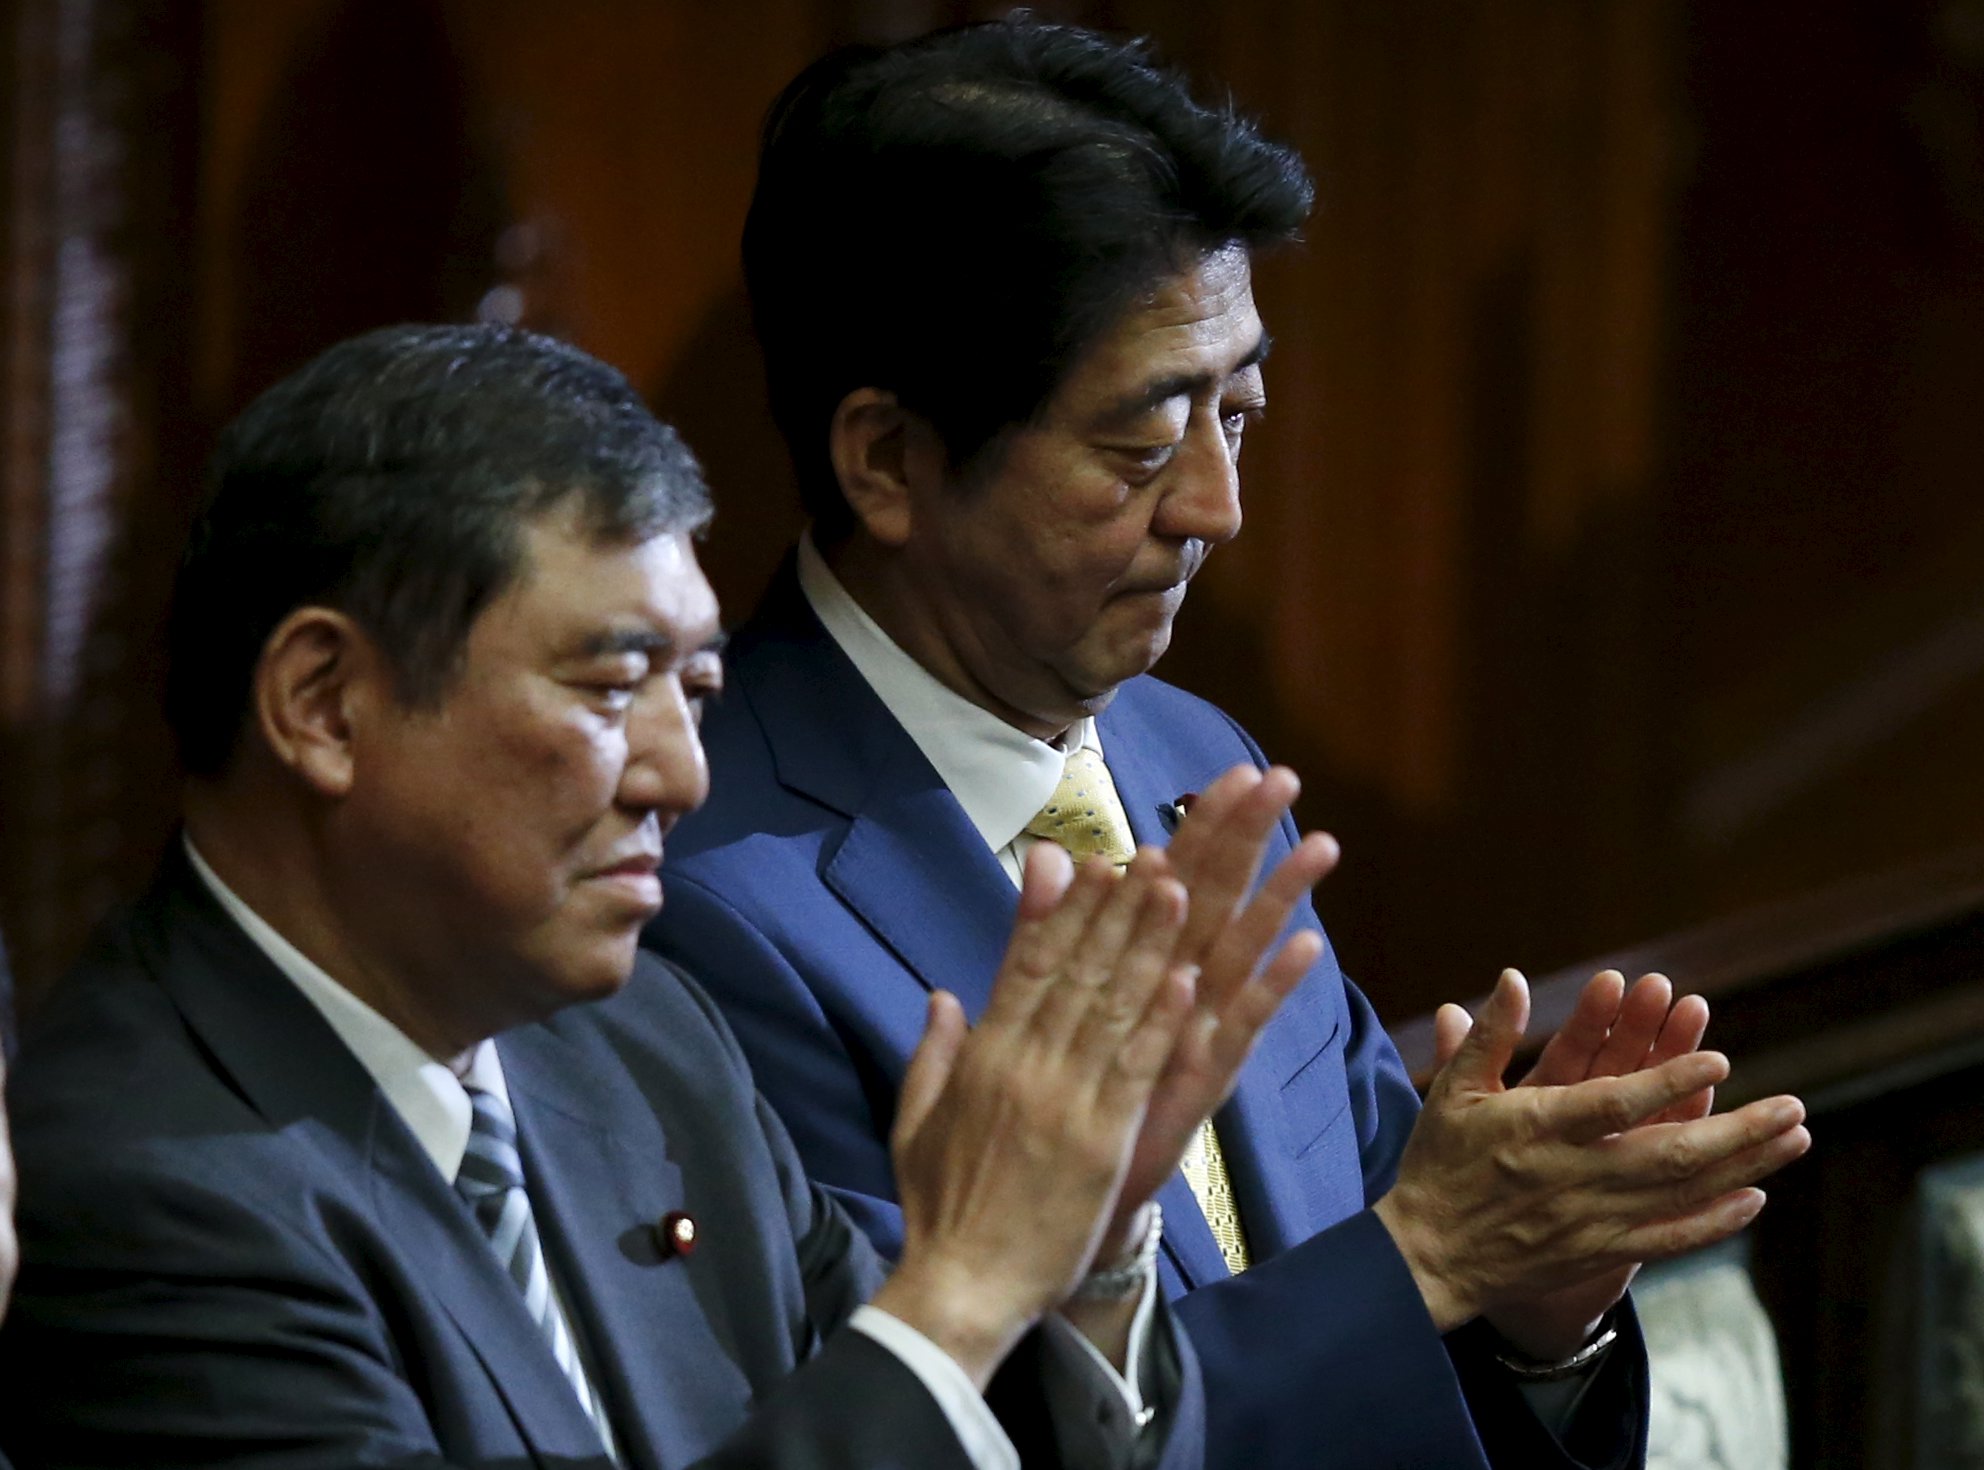 Japan's Prime Minister Shinzo Abe and minister in charge of reviving local economies Shigeru Ishiba applaud after the government-proposed security-related legislation passes in the Lower House during the plenary session of the parliament in Tokyo on Thursday. | REUTERS